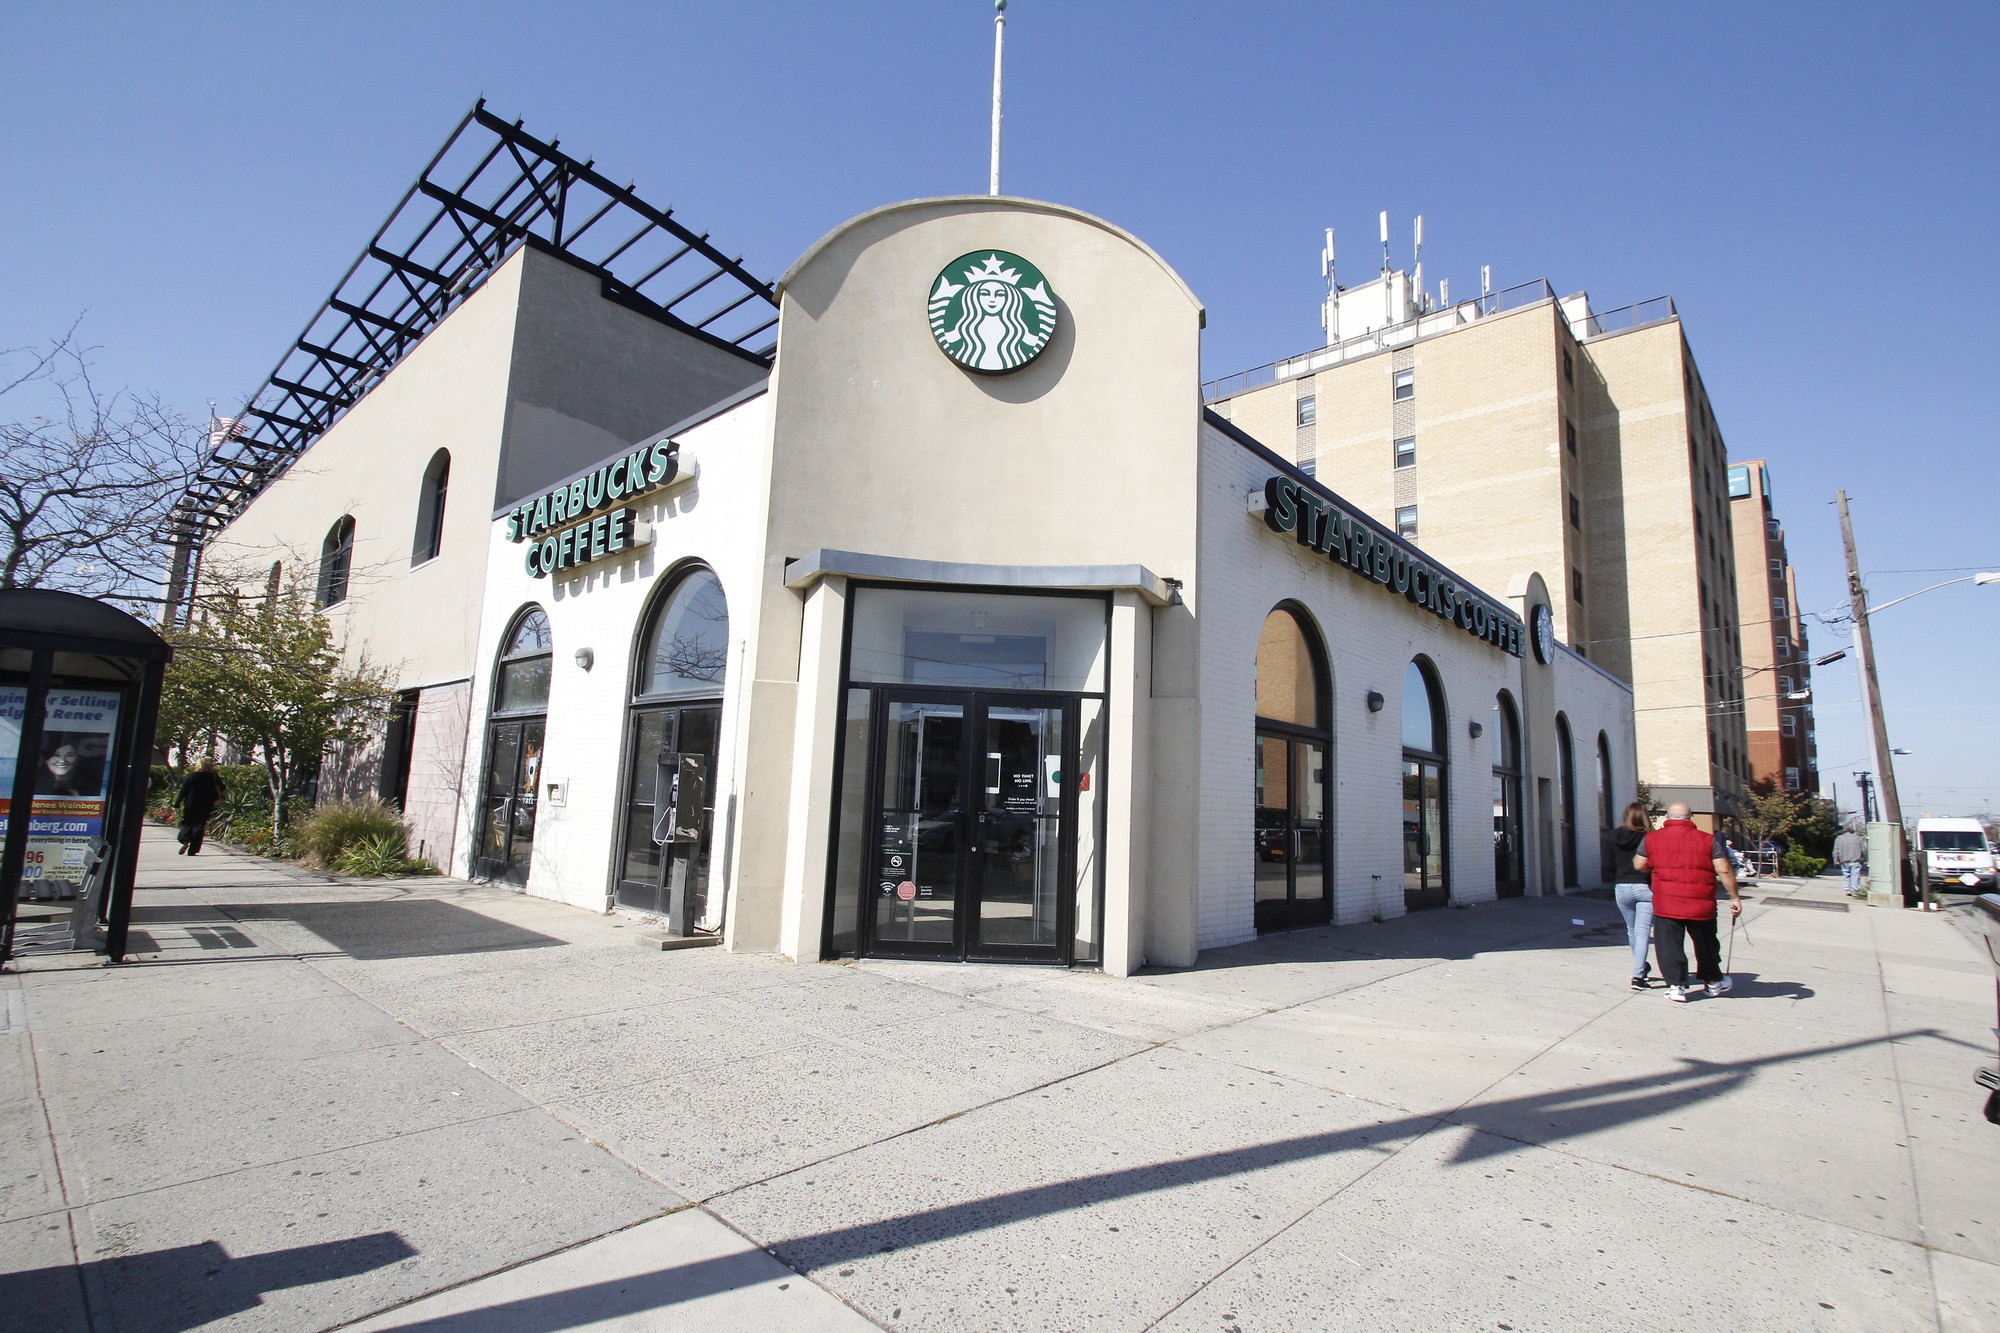 Starbucks in Long Beach was granted a license to serve alcohol from 5:30 p.m. to 10 p.m after Tuesday's SLA hearing in Manhattan.